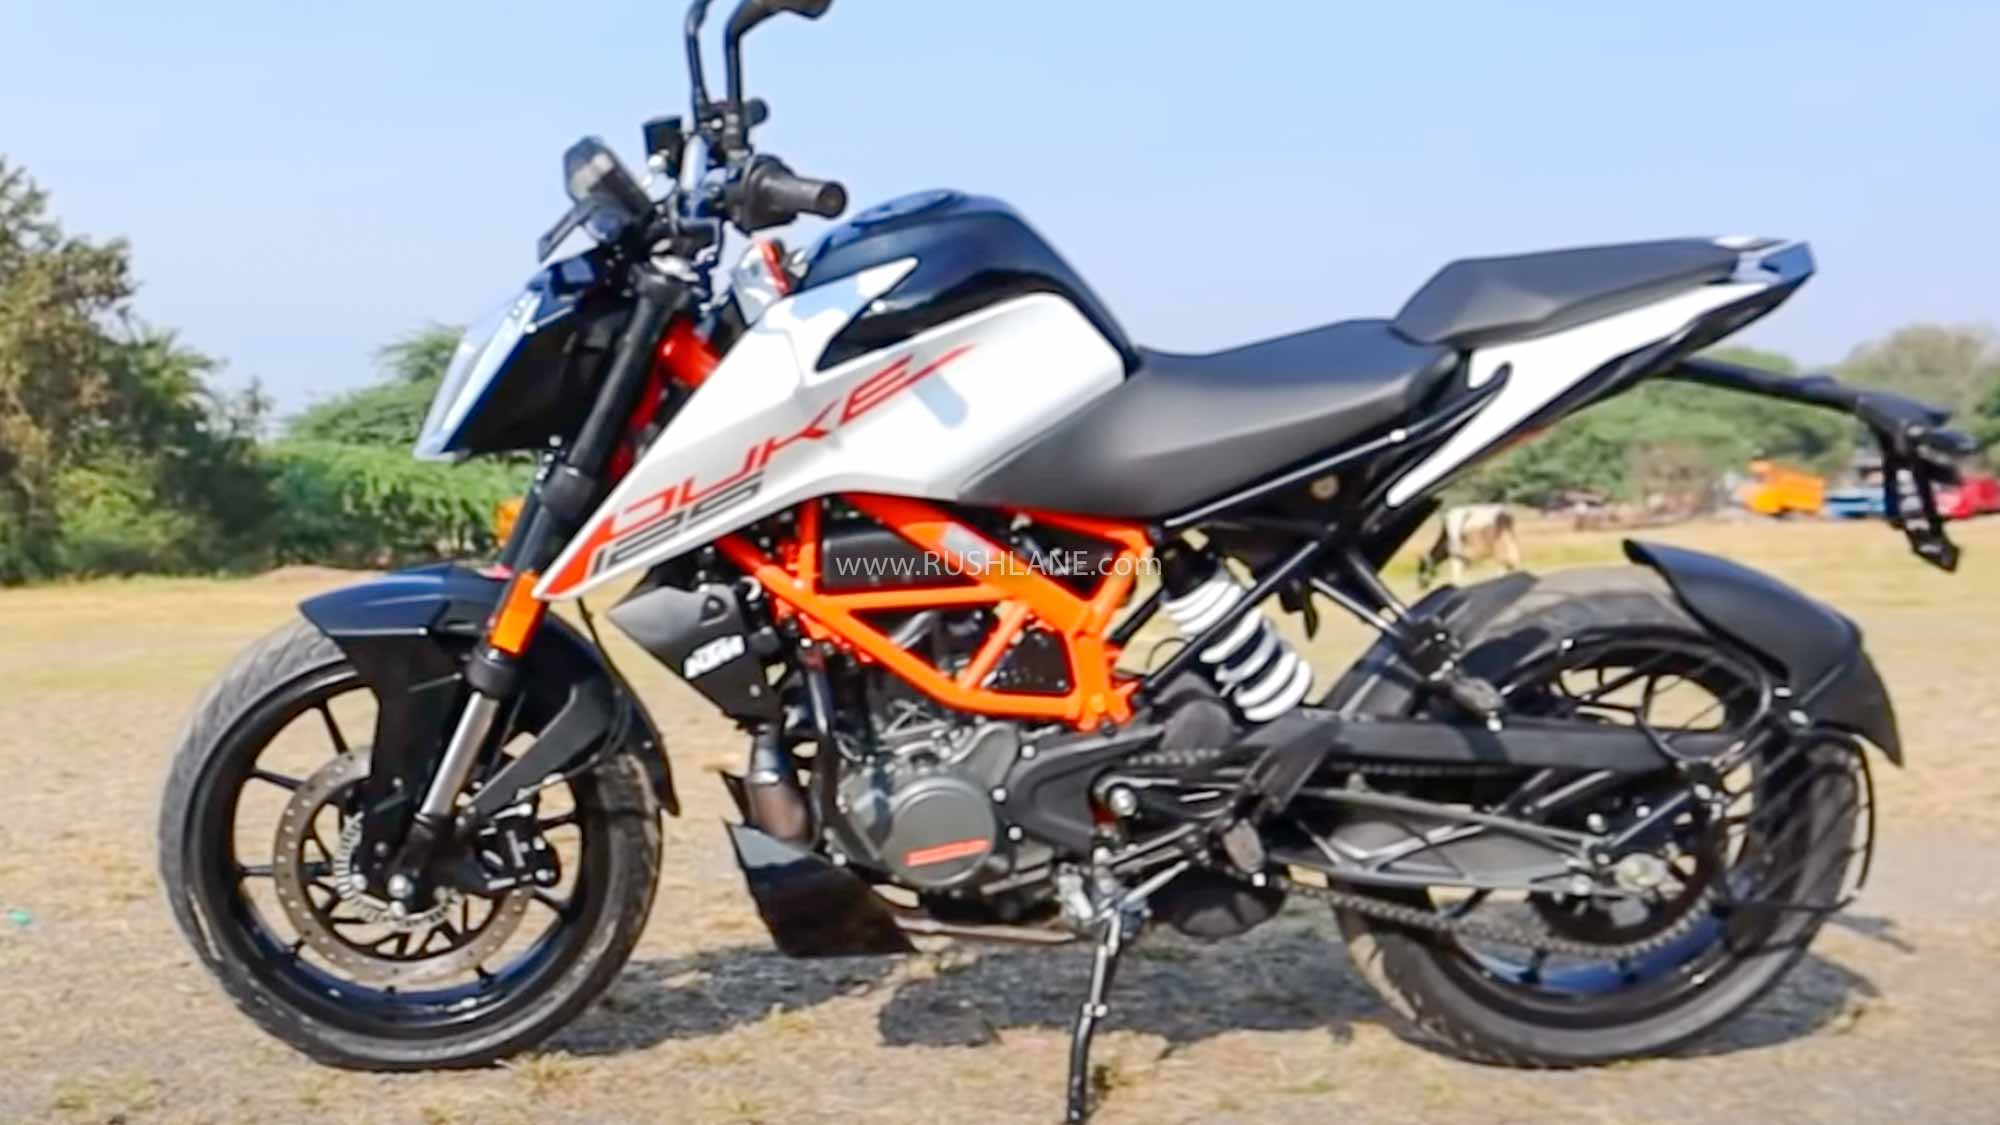 new-ktm-duke-125-launch-price-rs-1-5-lakh-first-look-walkaround